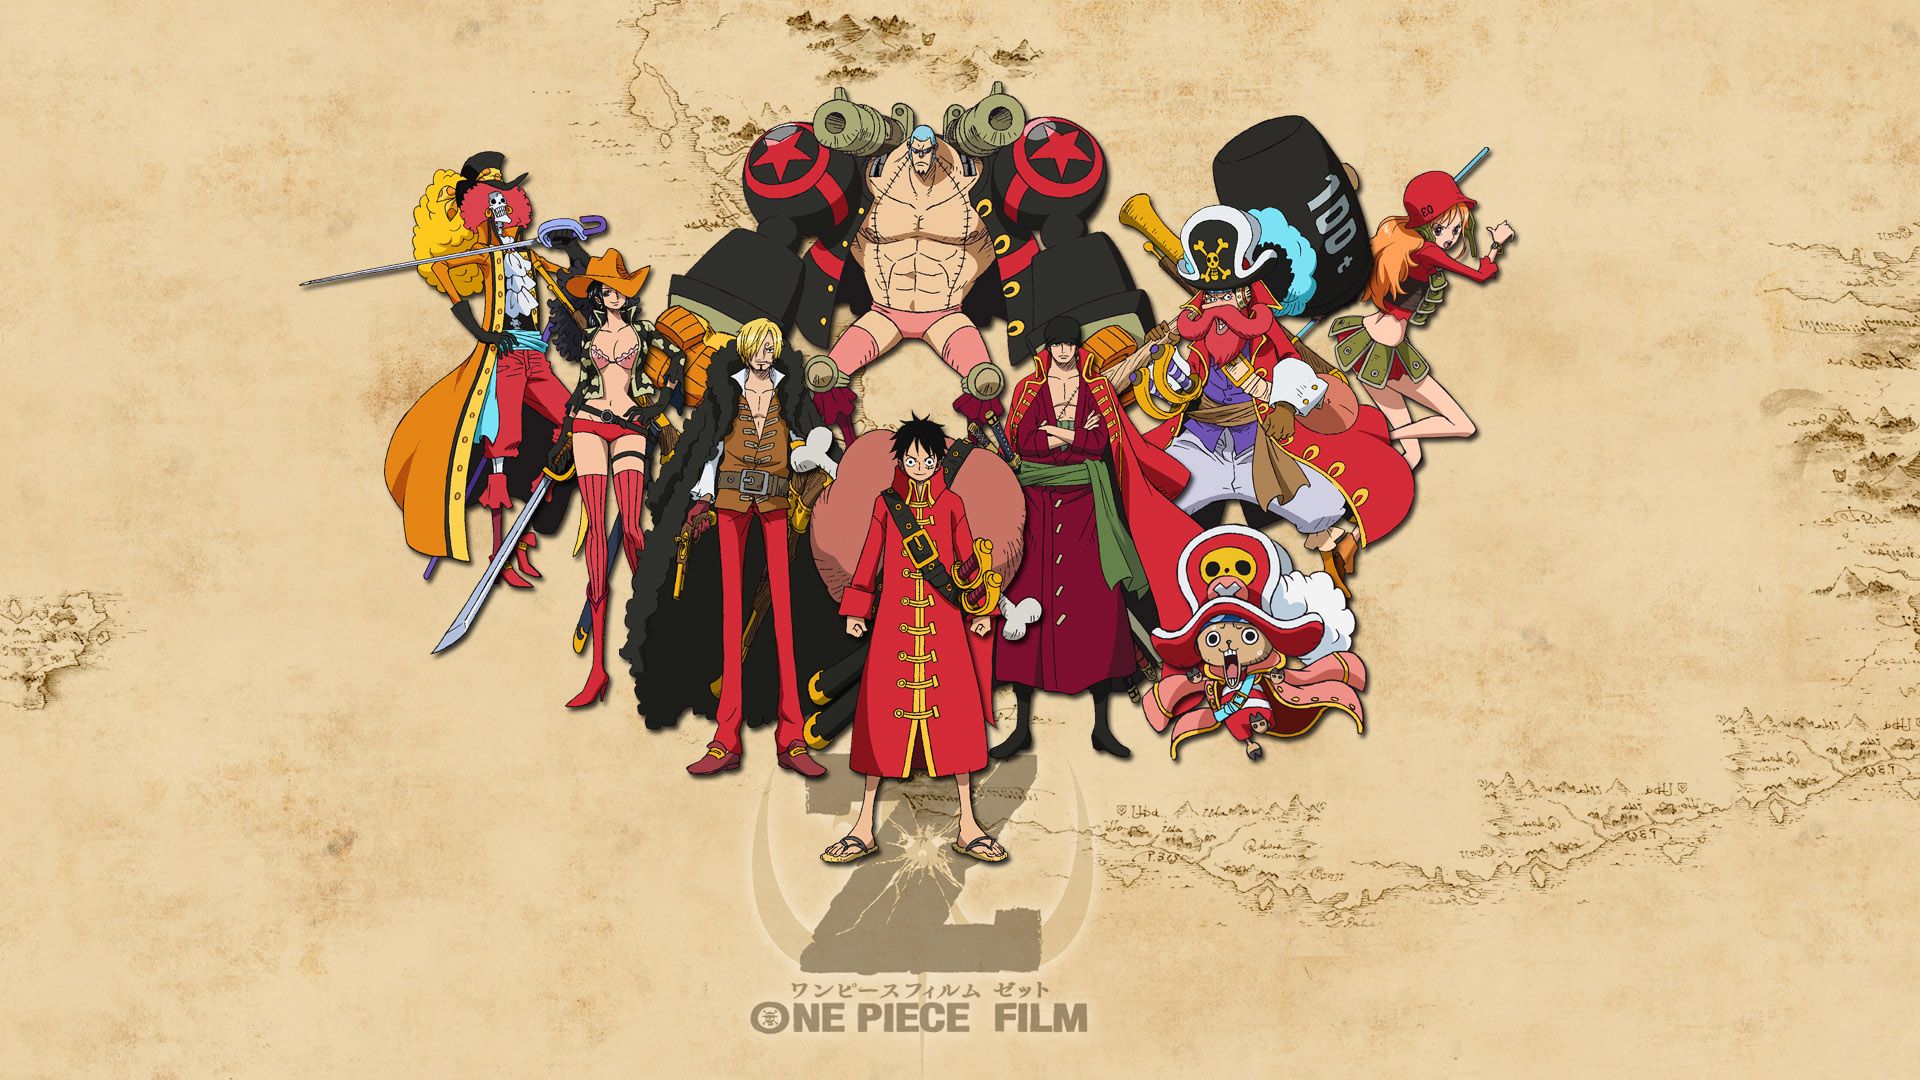 One-Piece-Z-Wallpaper-HD | wallpapers55.com - Best Wallpapers for ...